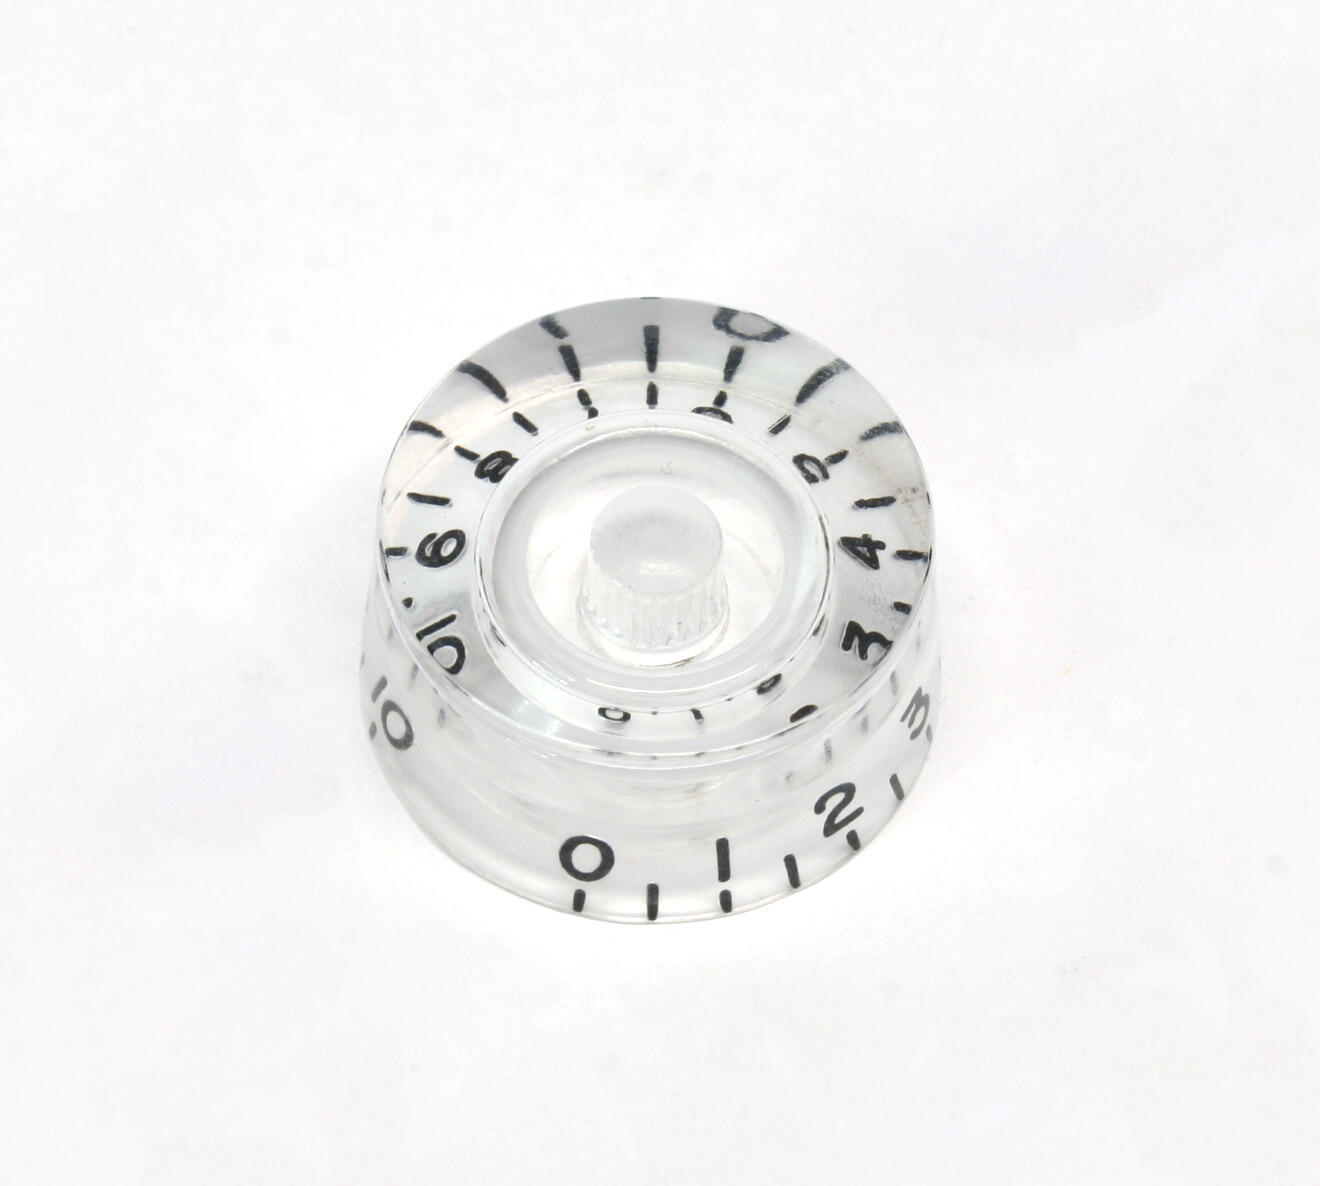 Clear Speed knobs vintage style numbers, fits USA split shaft pots.